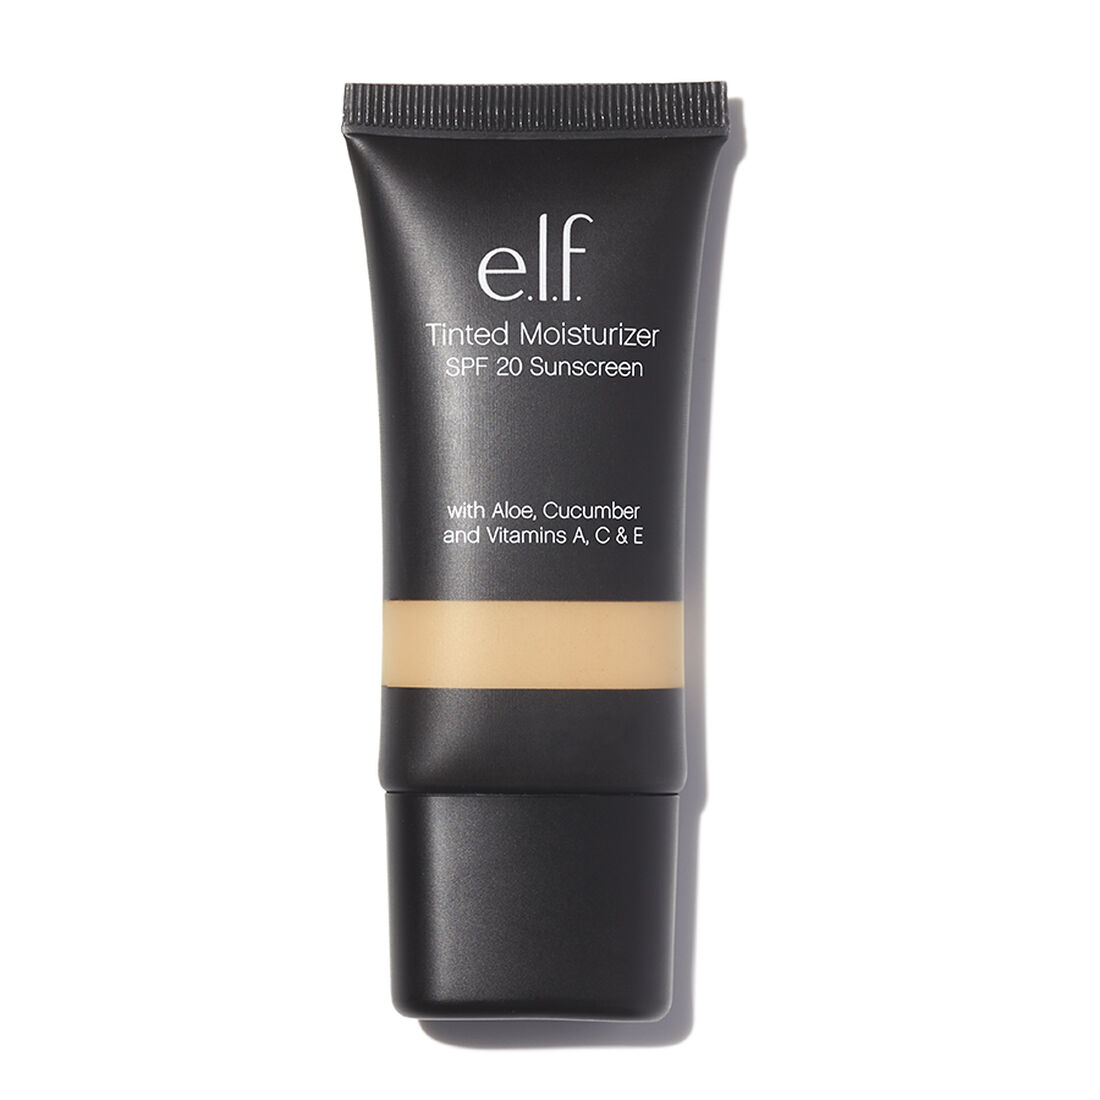 Tinted Facial Moisturizer with SPF 20 | e.l.f. Cosmetics UK- Cruelty Free